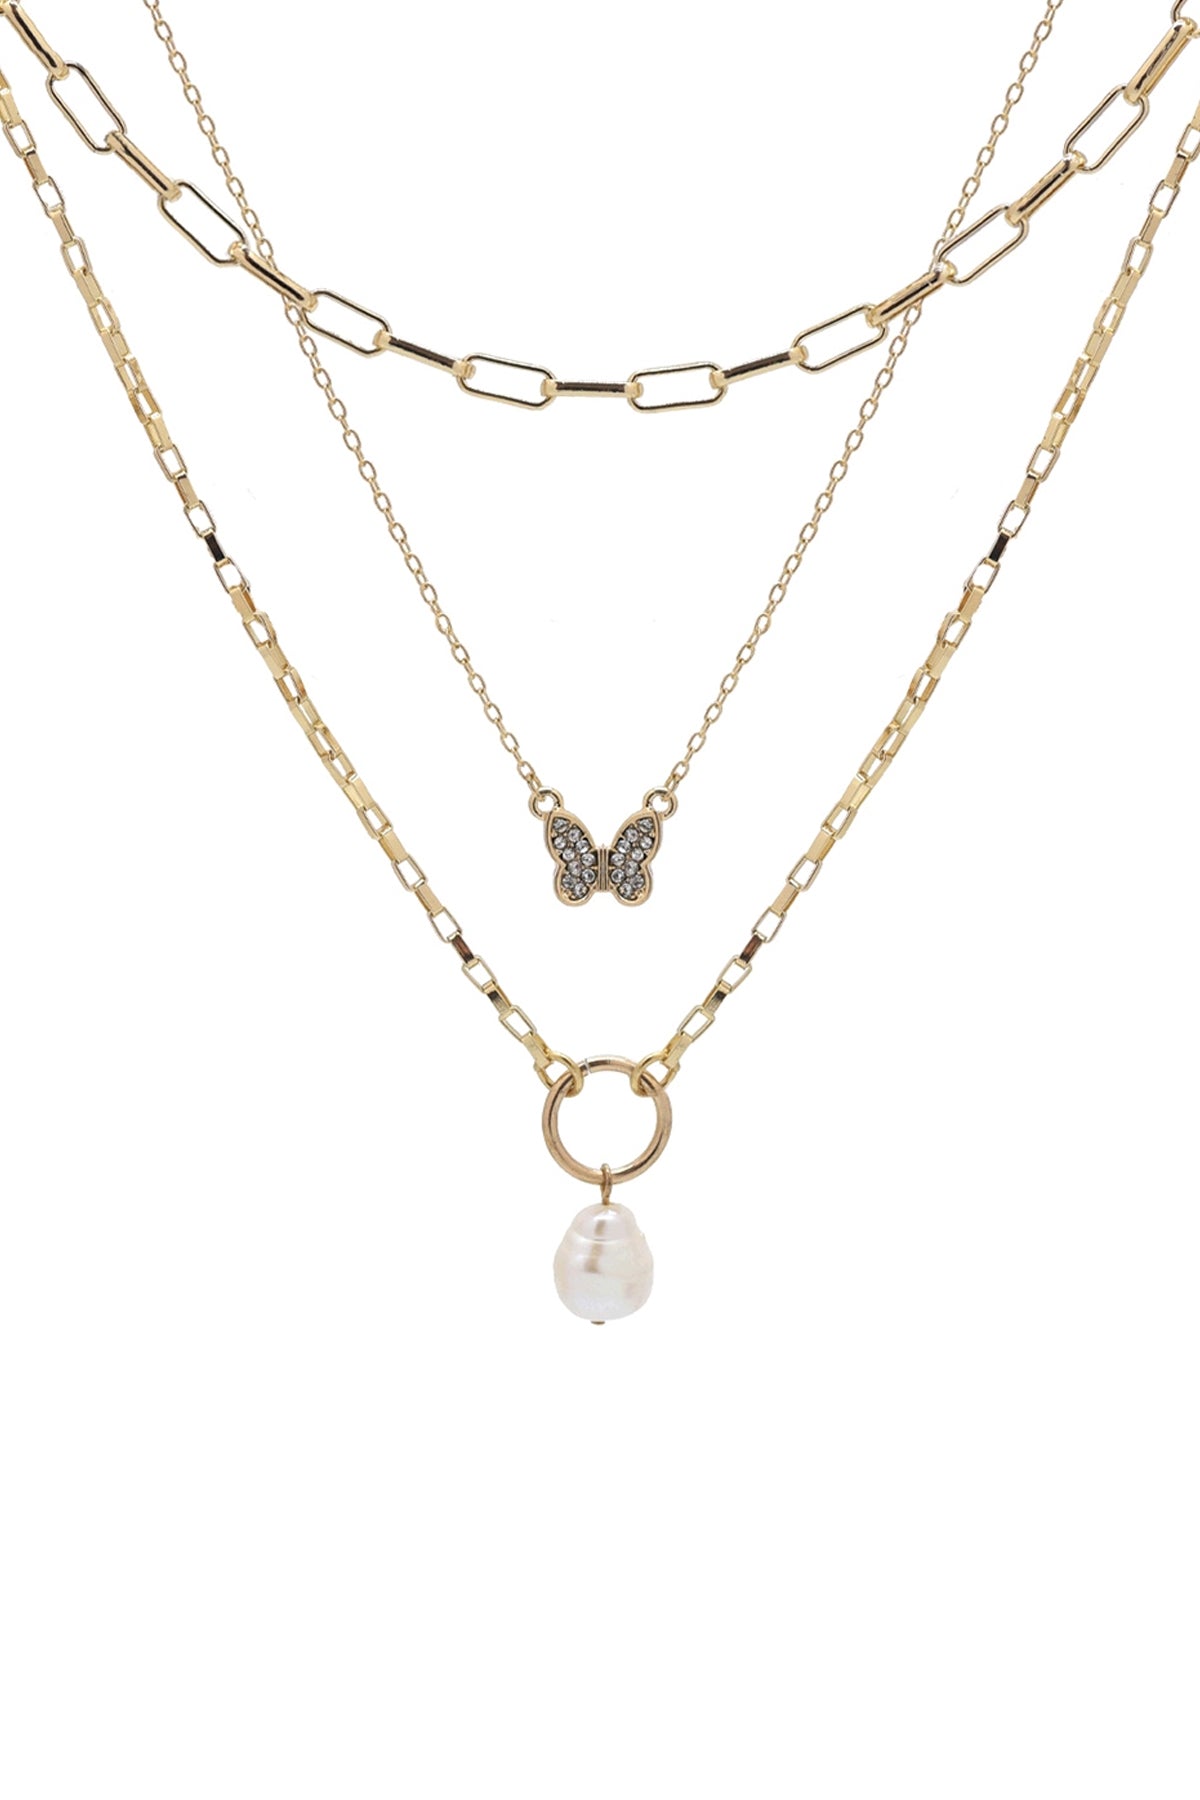 FRESH WATER PEARL W/ BUTTERFLY LAYERED 3 SET CHAIN NECKLACE